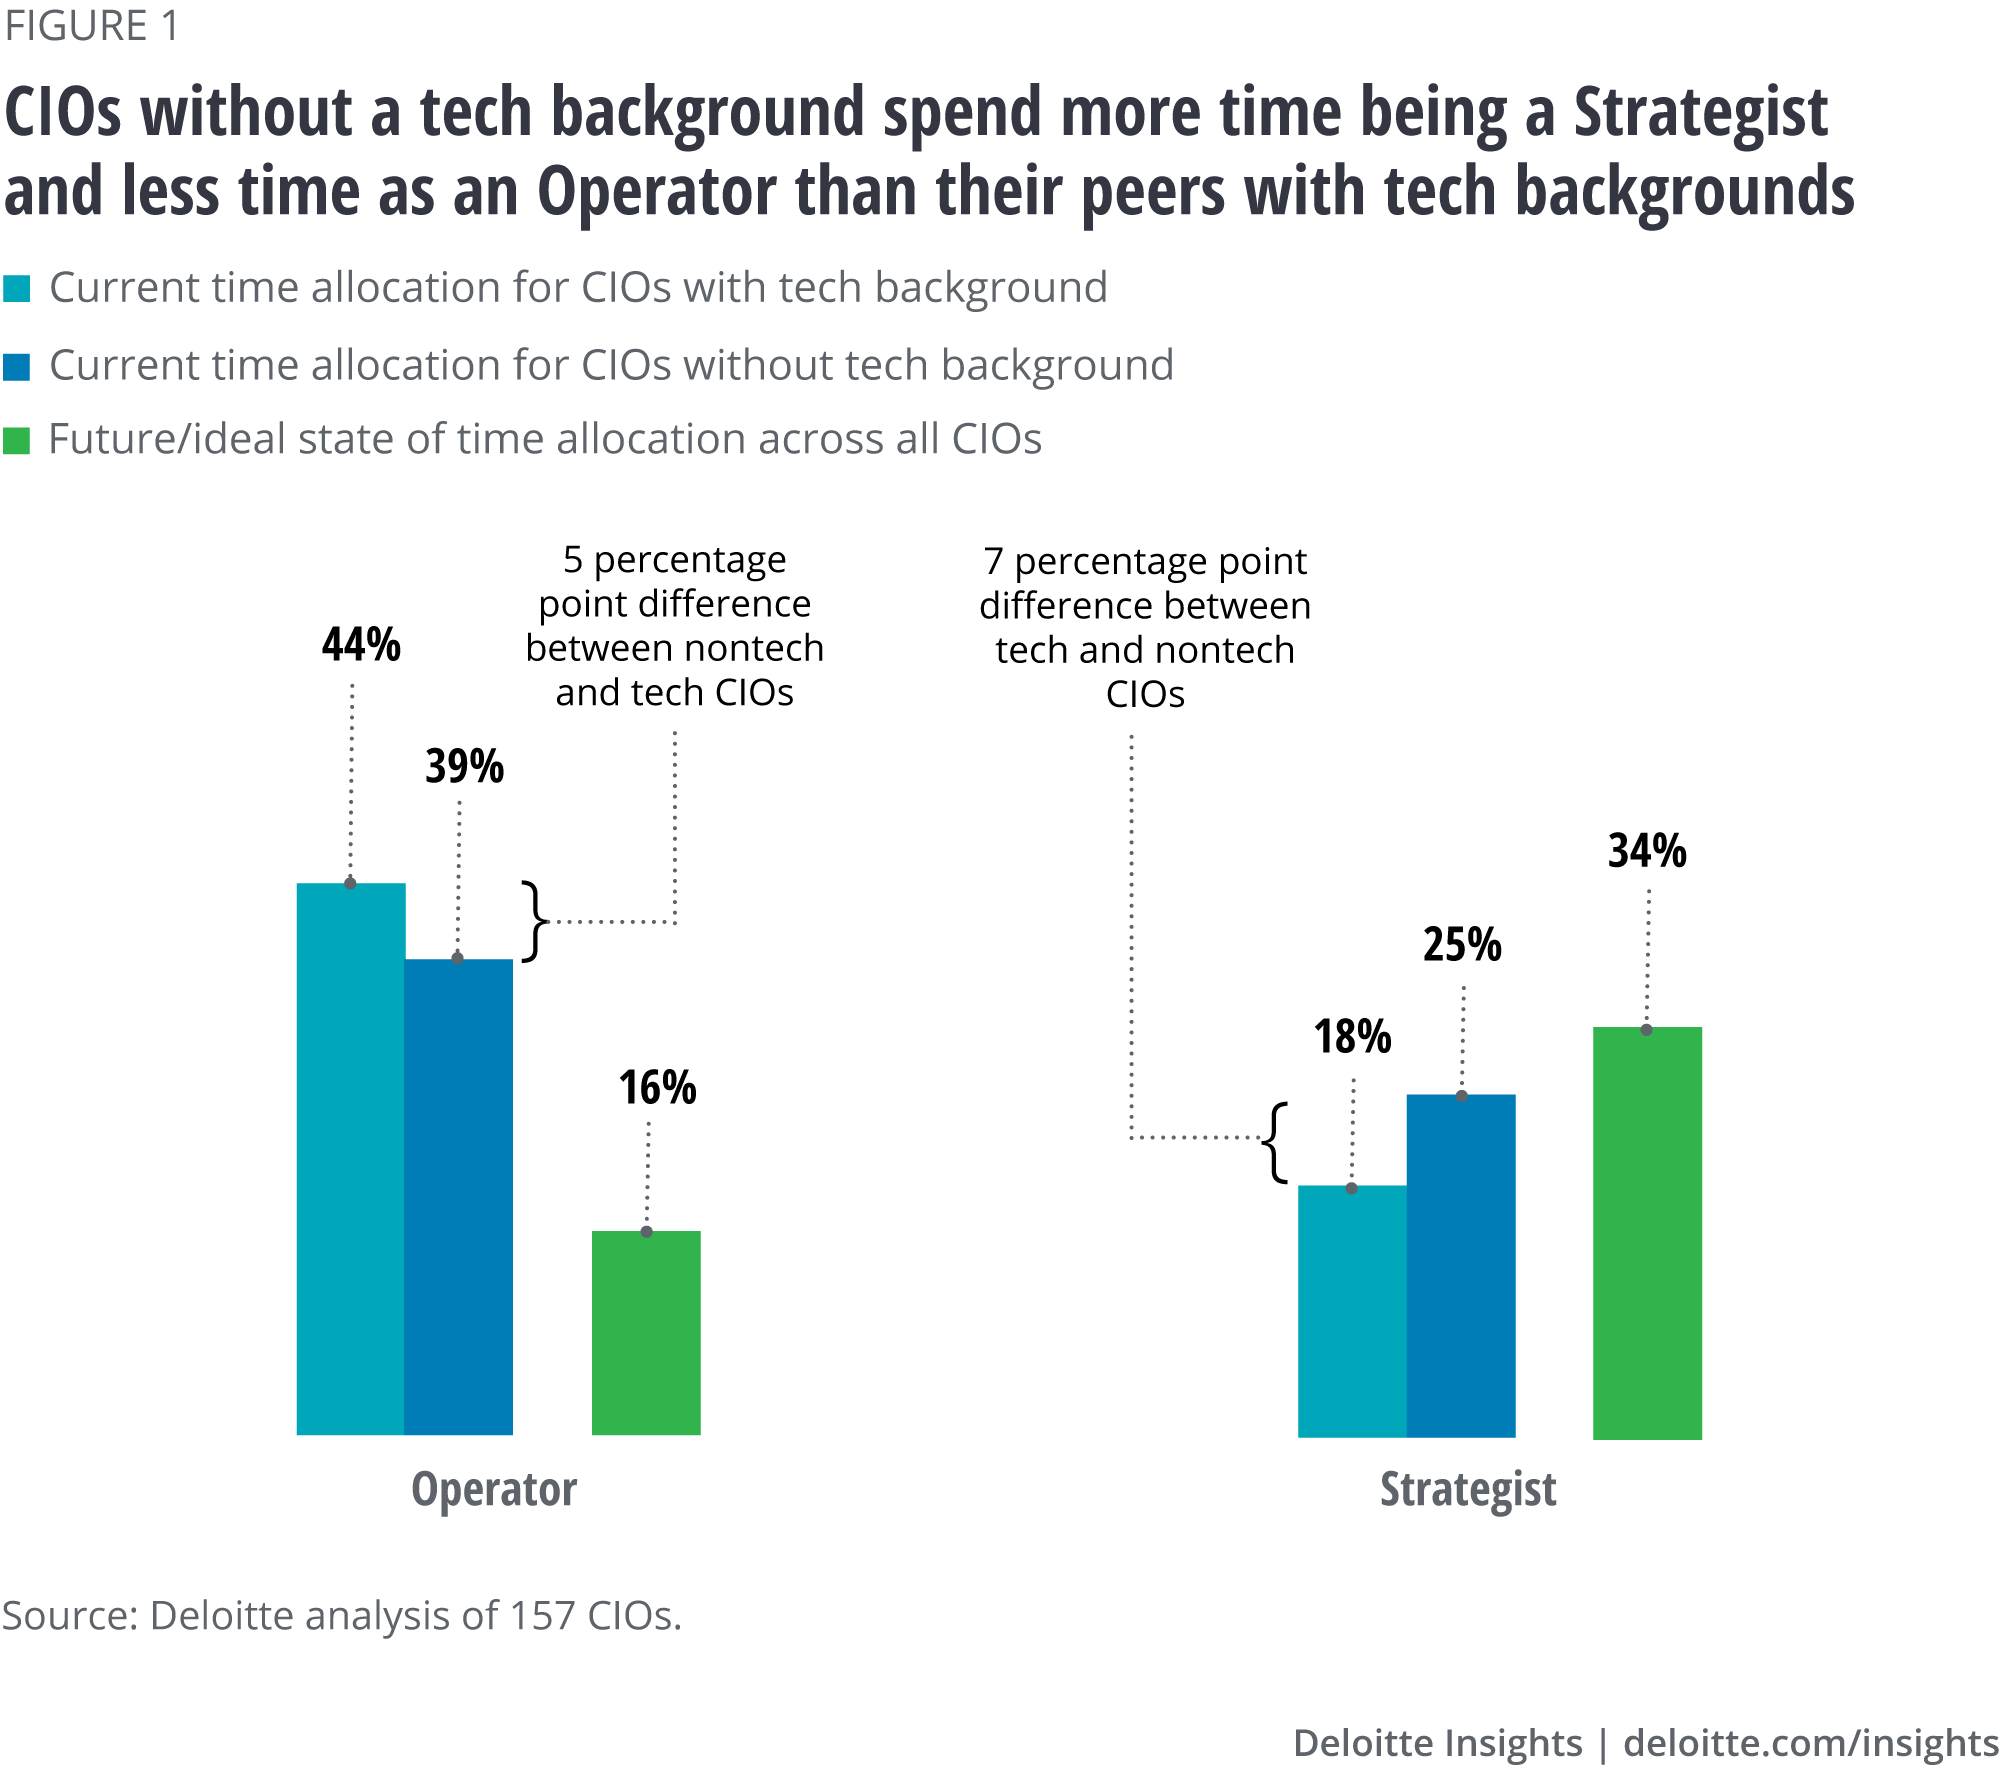 CIOs without a tech background spend more time being a Strategist and less time as an Operator than their peers with tech backgrounds